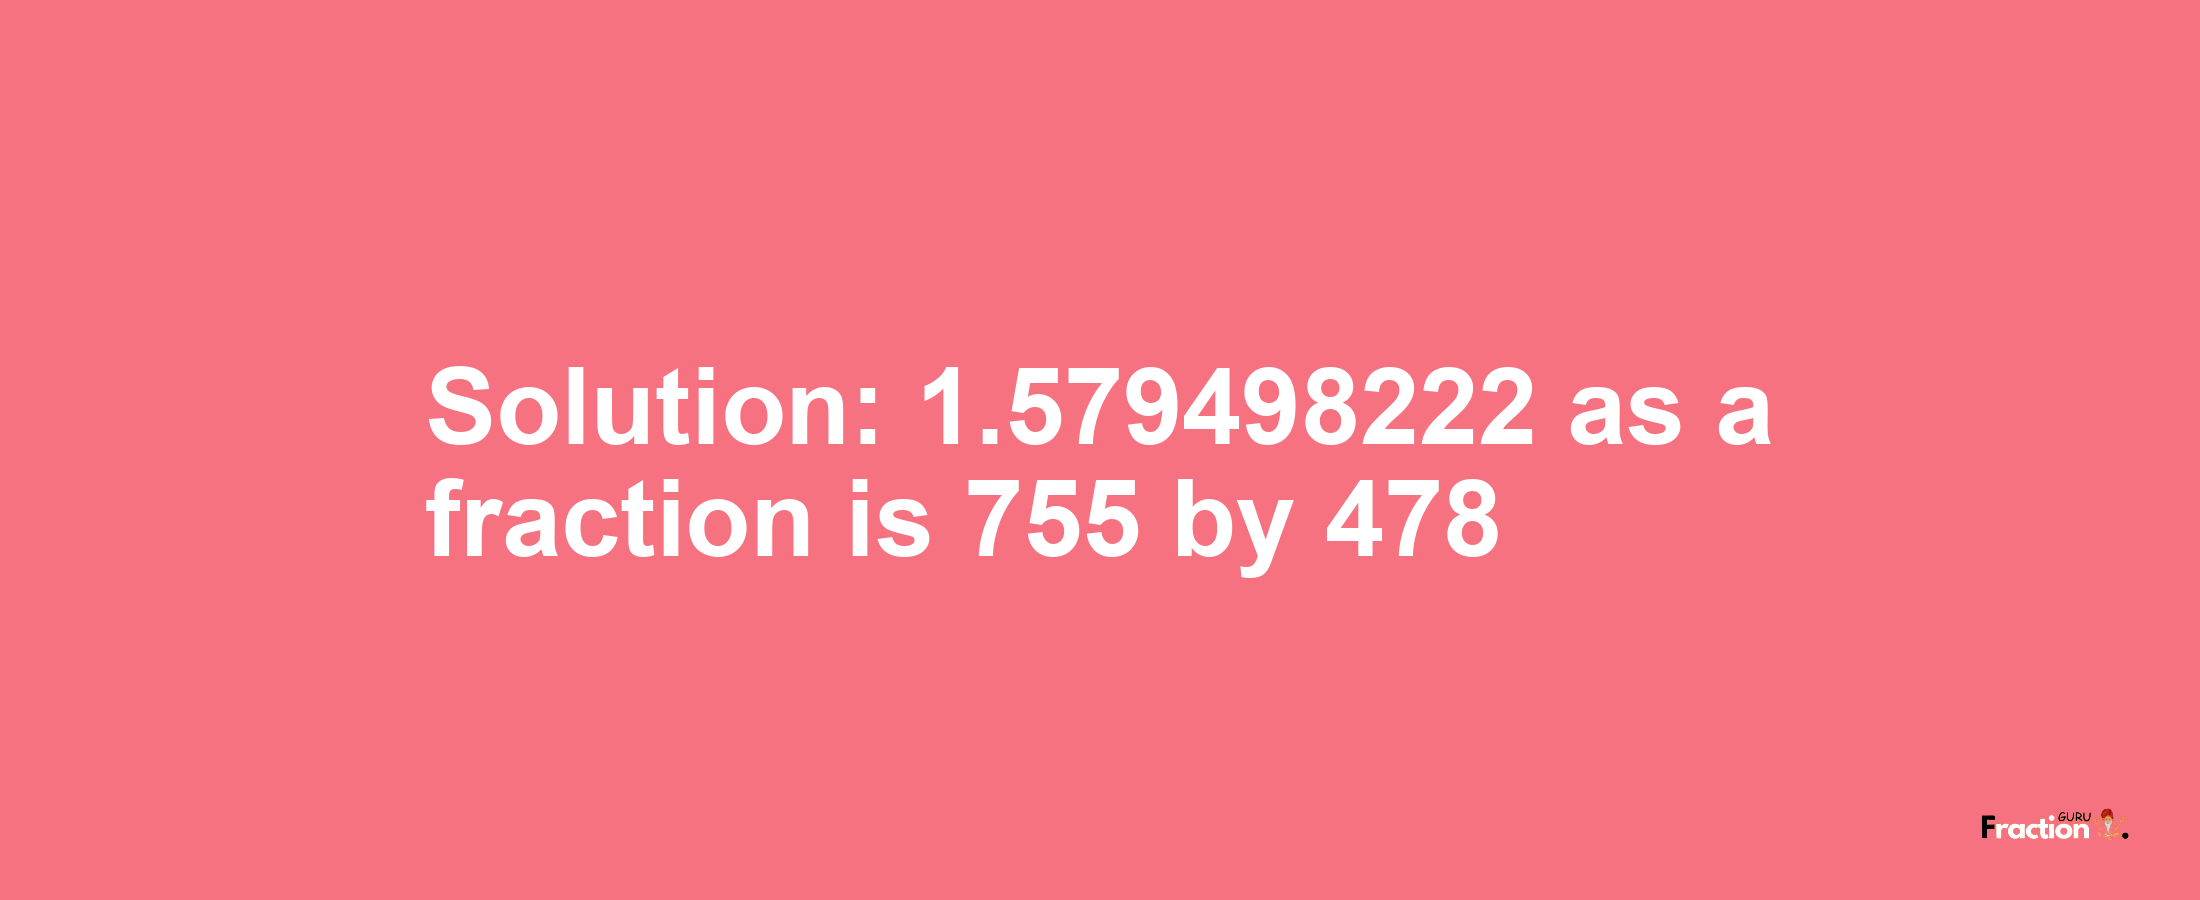 Solution:1.579498222 as a fraction is 755/478